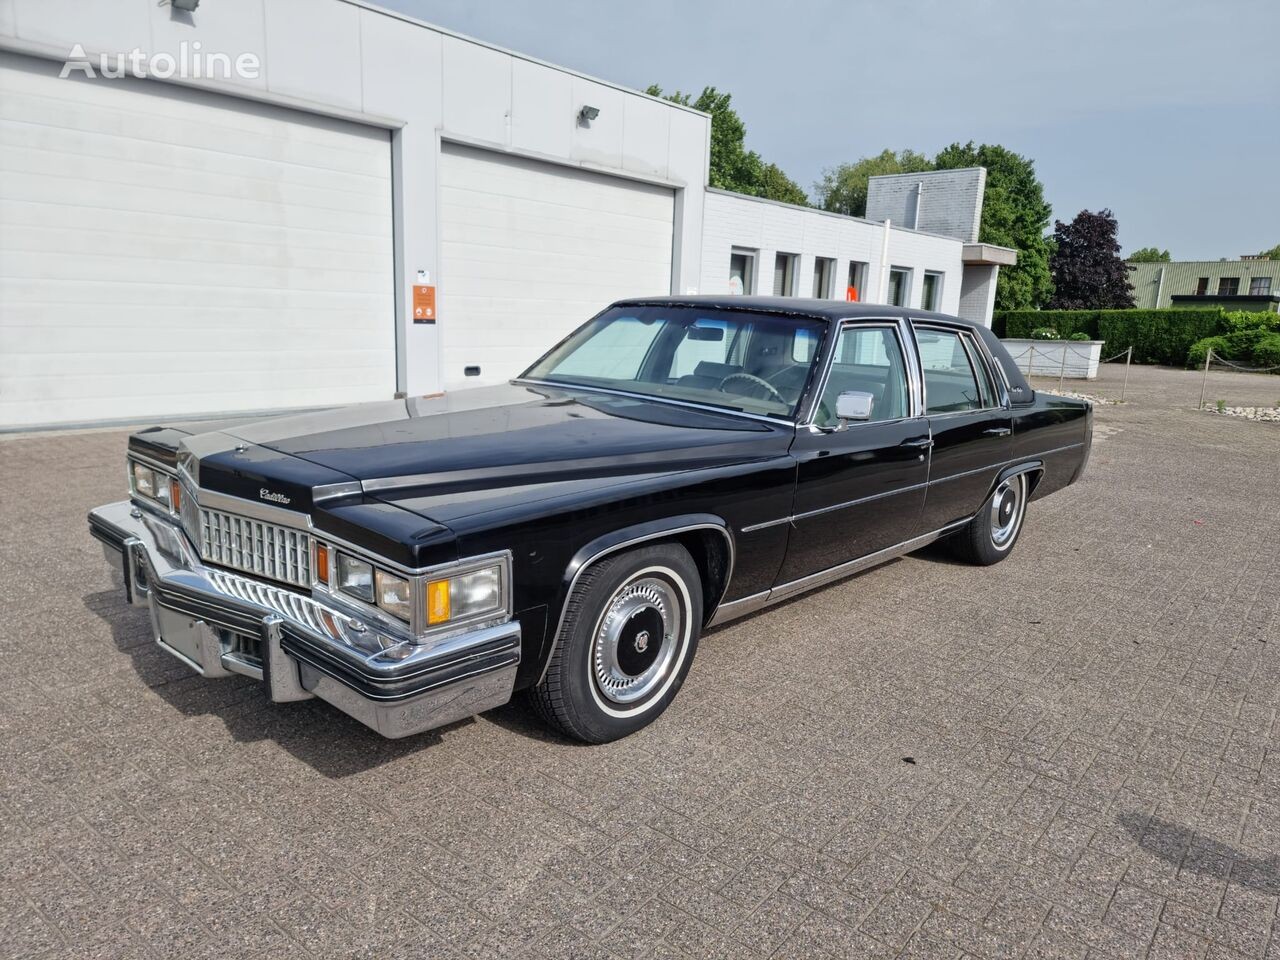 The recommended oil capacity and type for a Cadillac Fleetwood